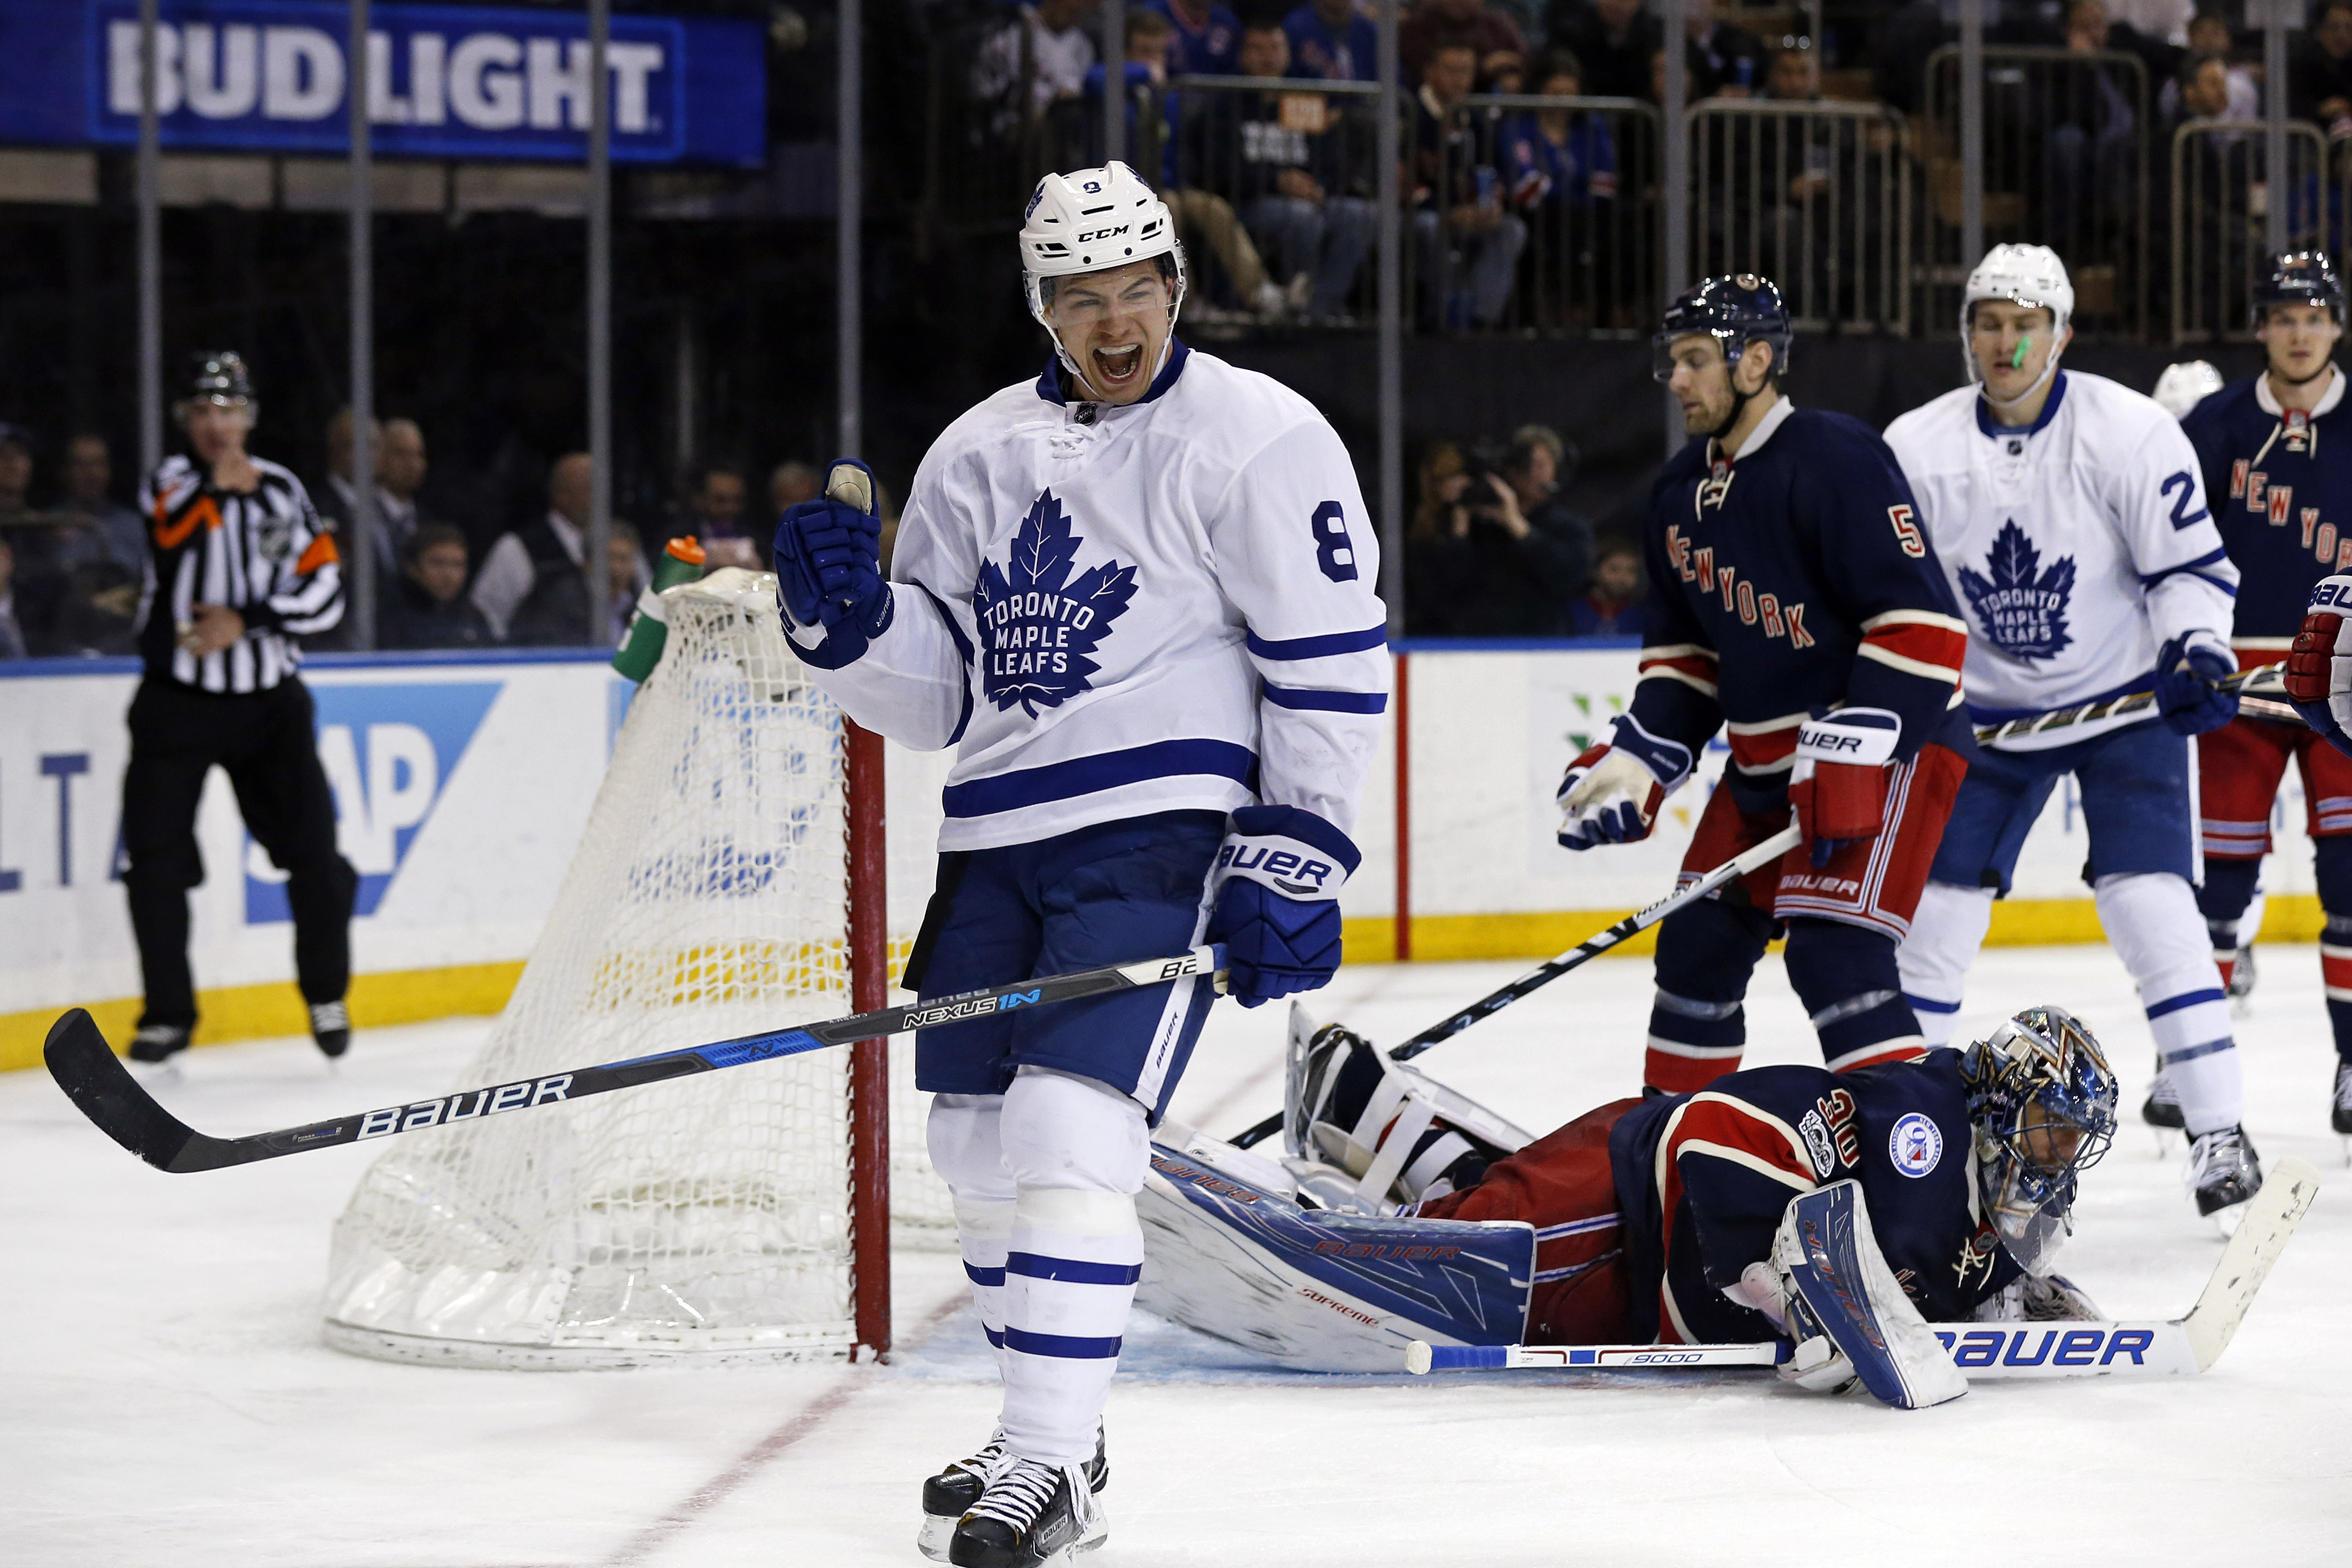 New York Rangers disappoint on Steven McDonald night against Leafs (Highlights) 